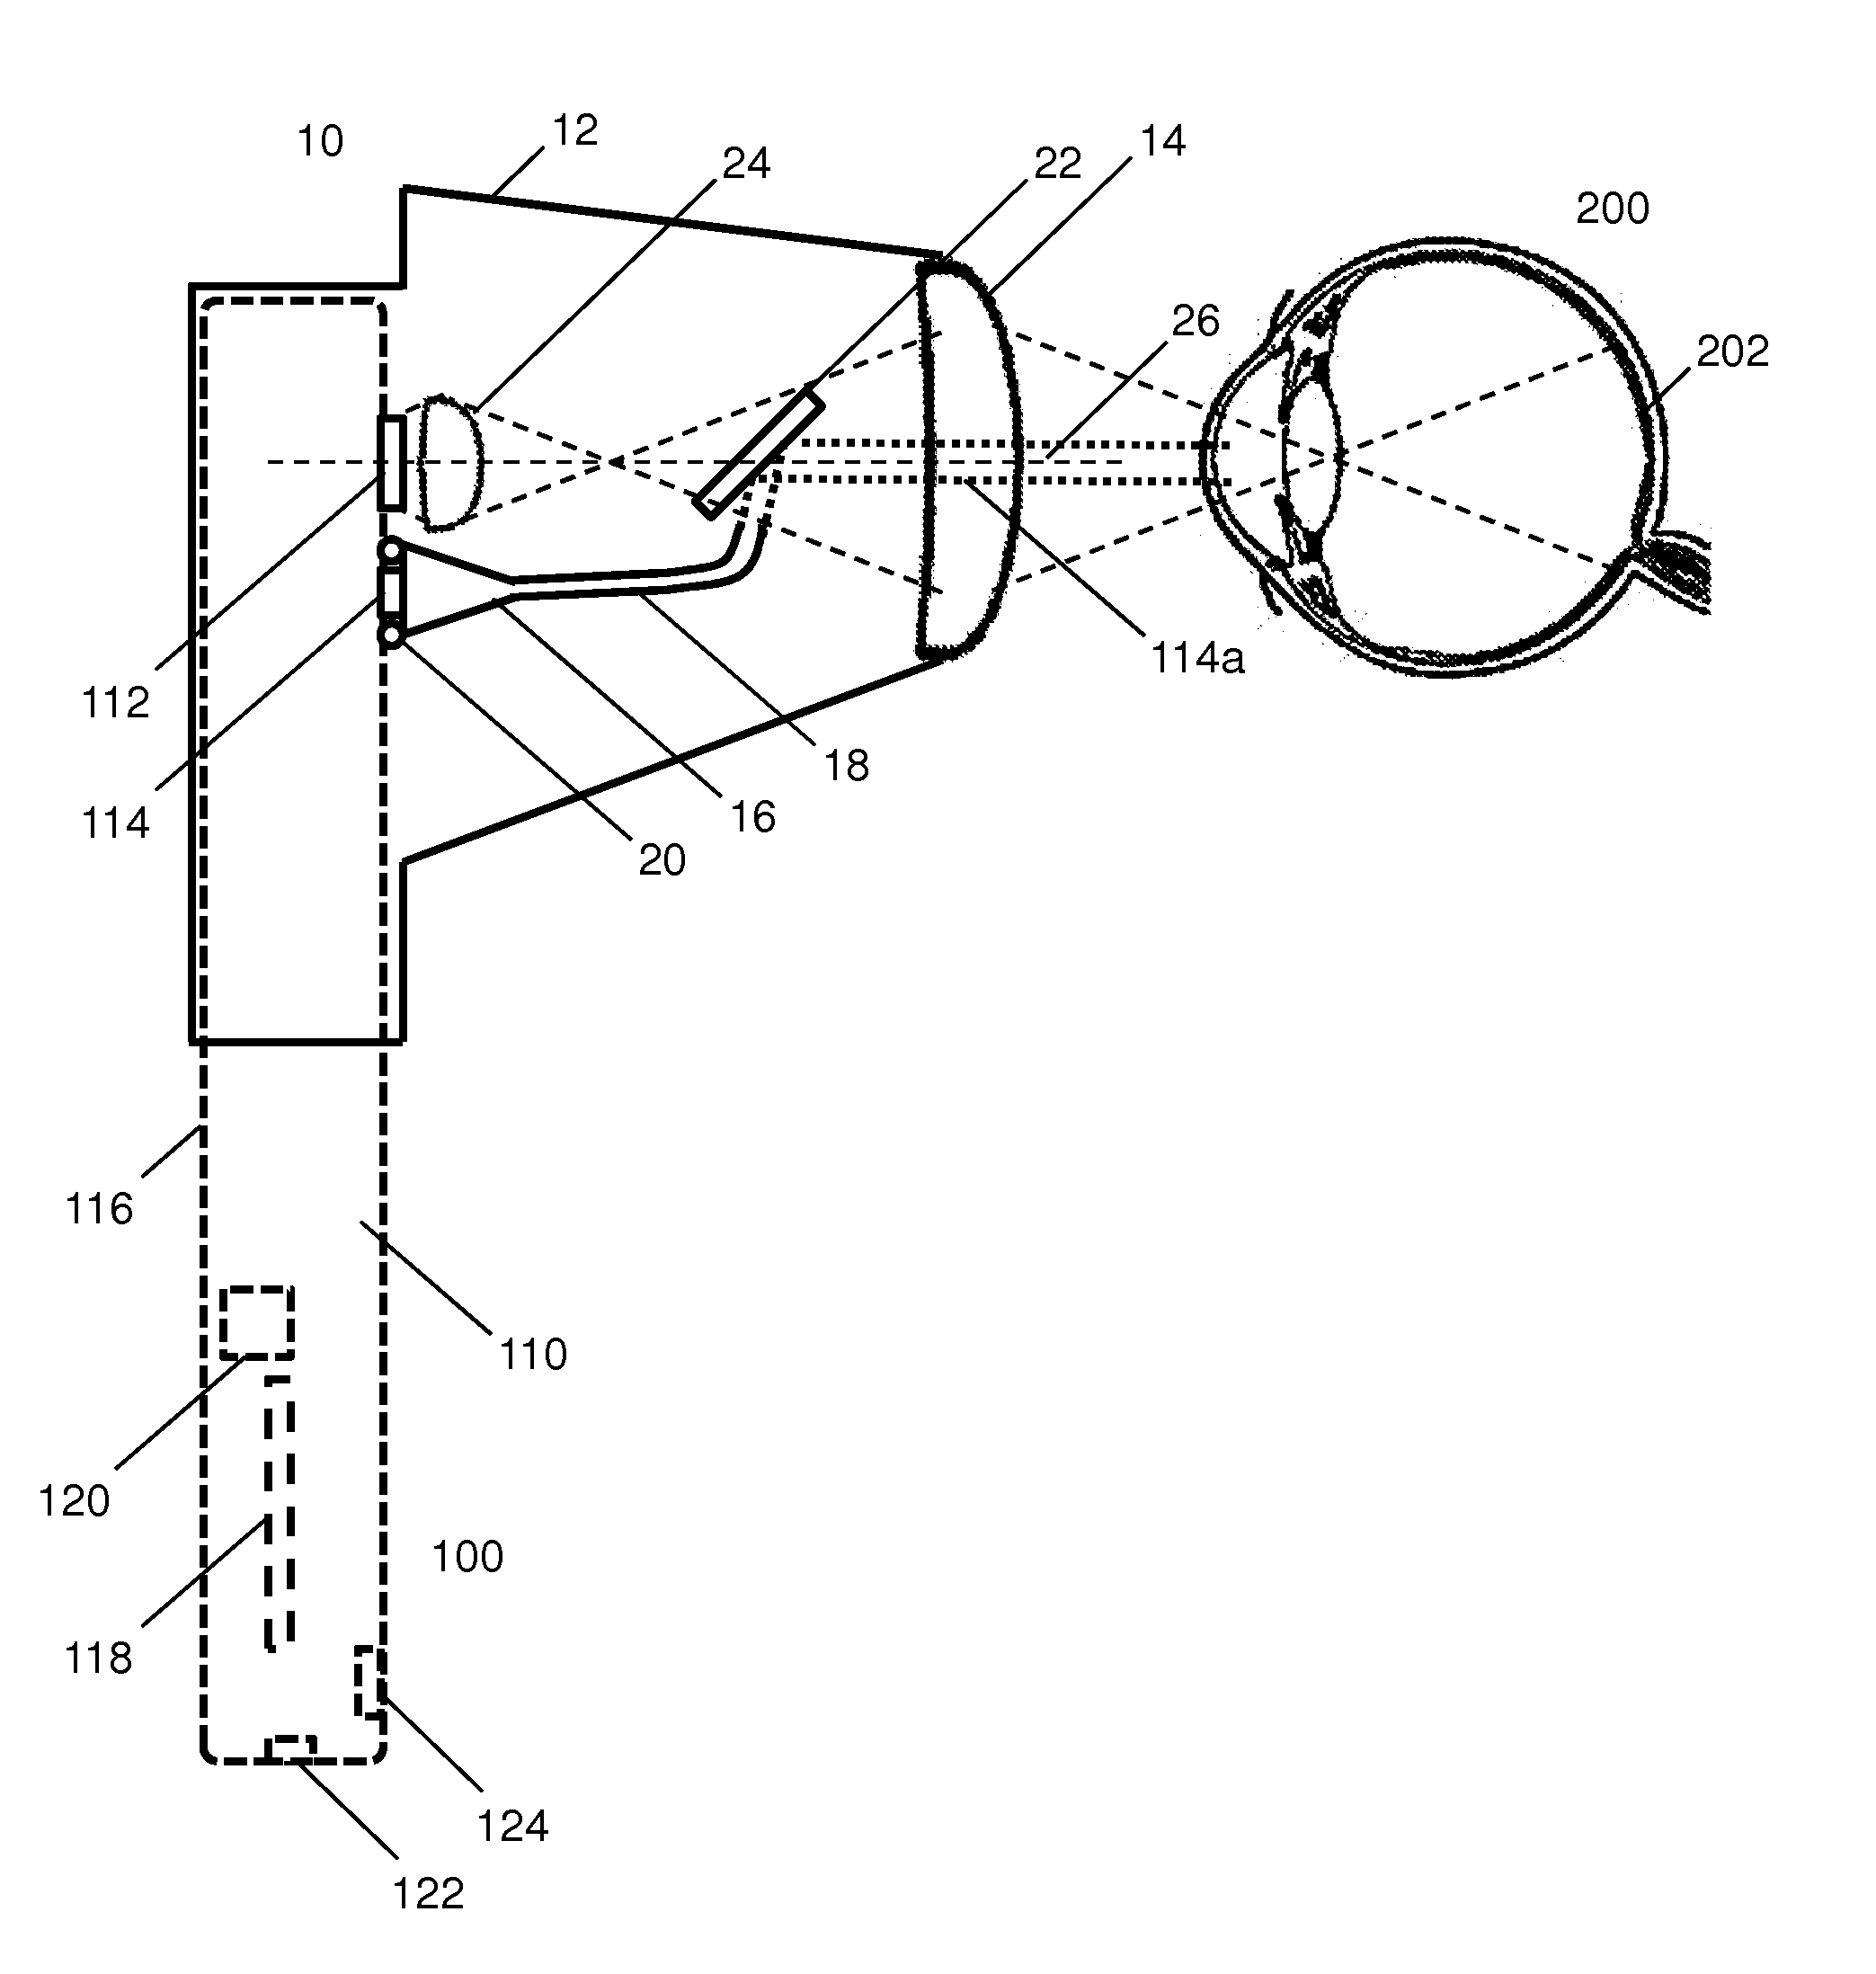 Optical adapter for ophthalmological imaging apparatus